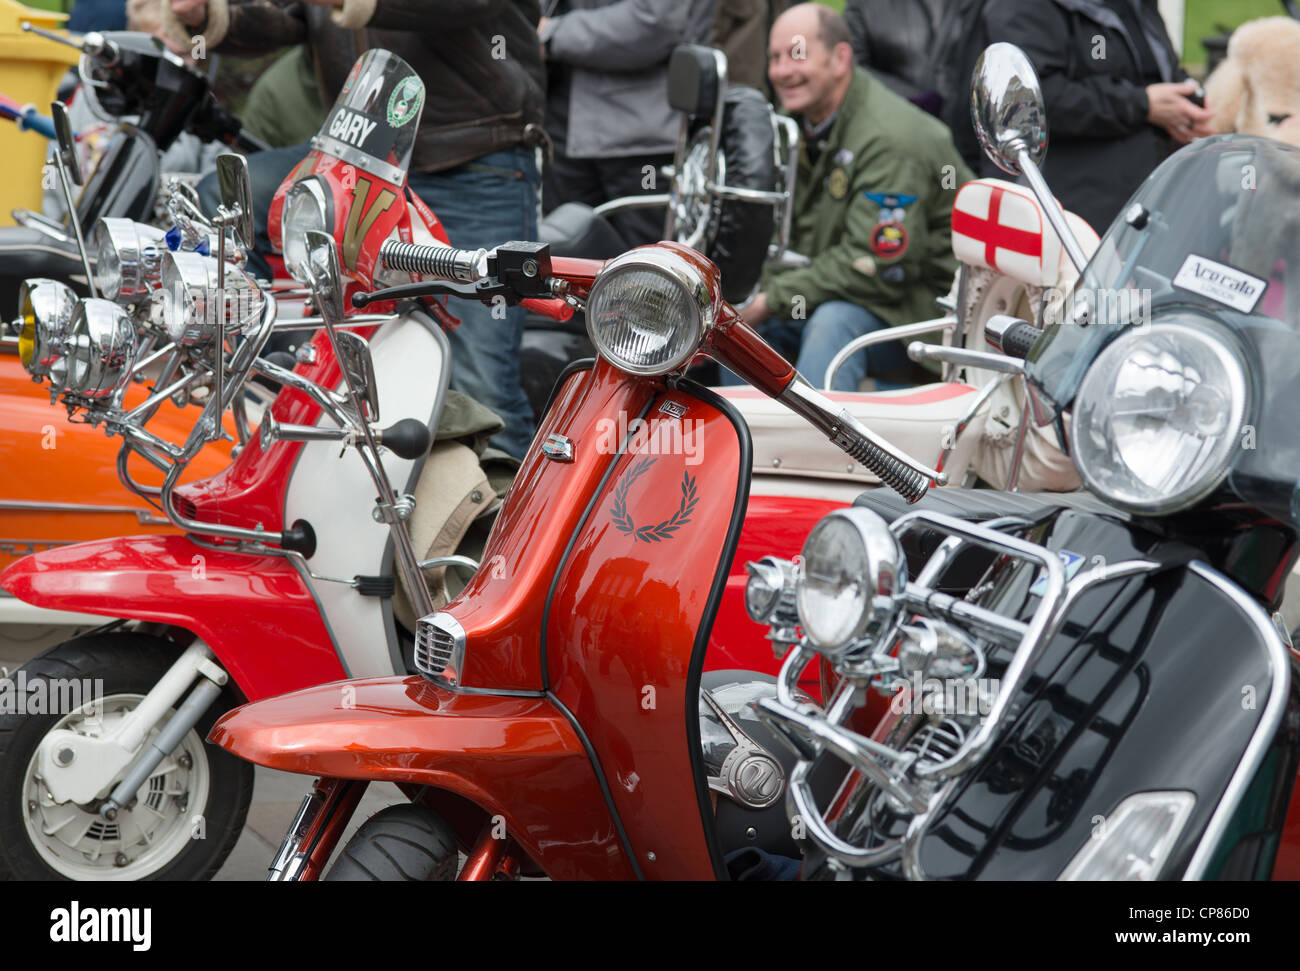 Scooter club rally in Cambridge, England. Stock Photo